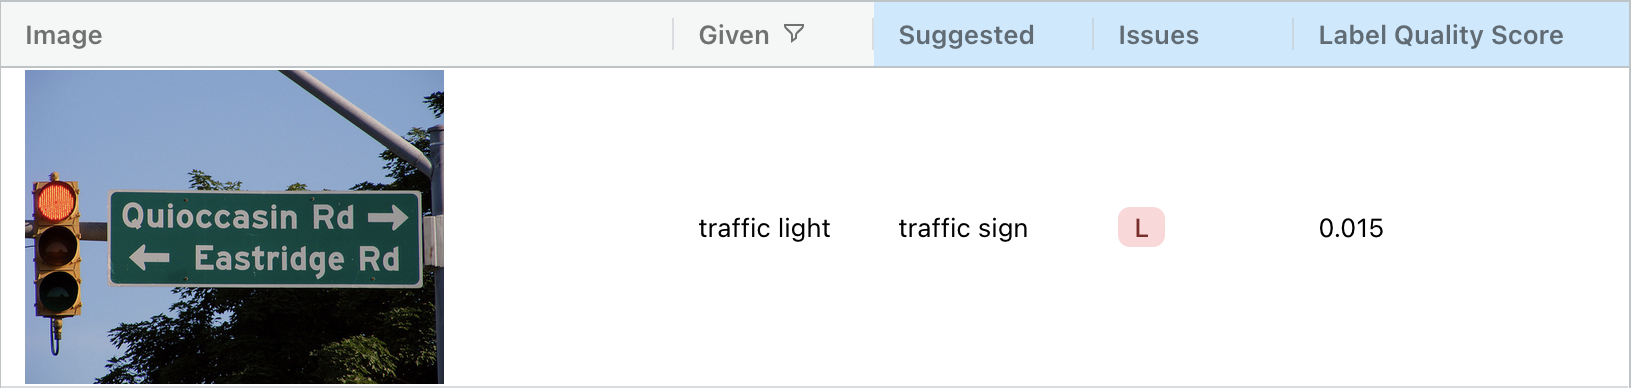 An image containing a traffic light and a traffic sign, labeled as "traffic light"